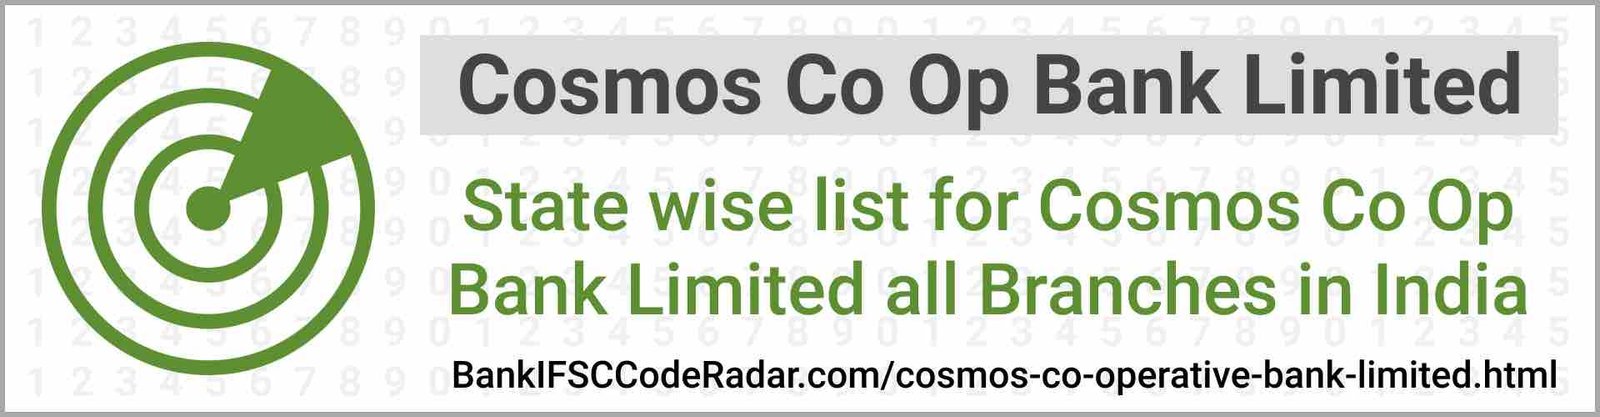 Cosmos Co Operative Bank Limited All Branches India